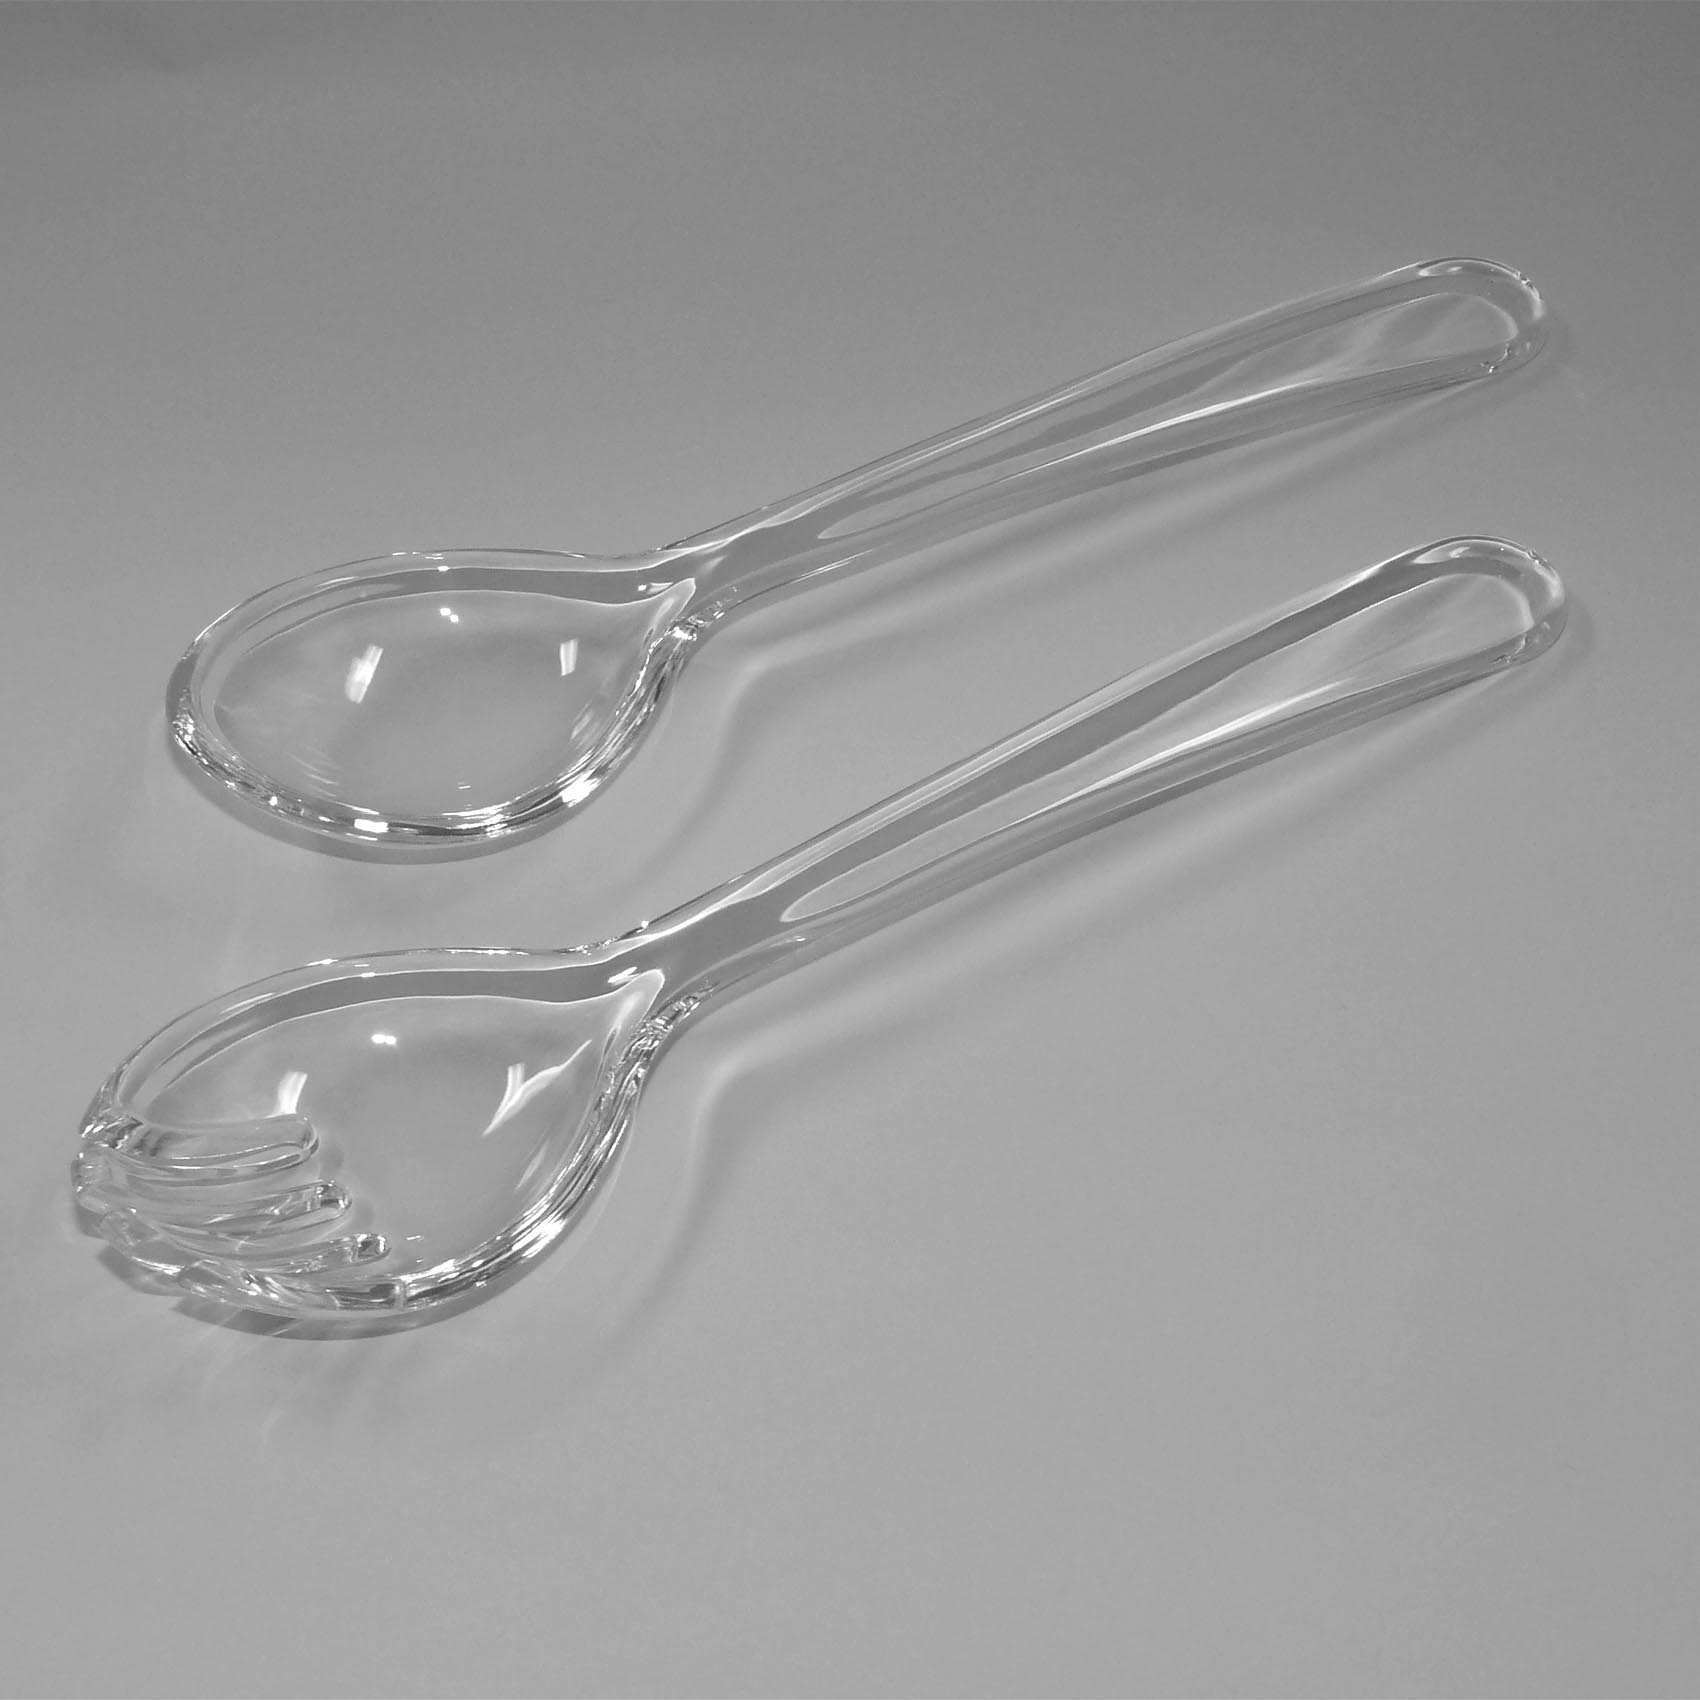 2PCS SALAD SERVE SET SPOON AND FORK HIGH QUALITY ACRYLIC  MADE IN TAIWAN CO-026C